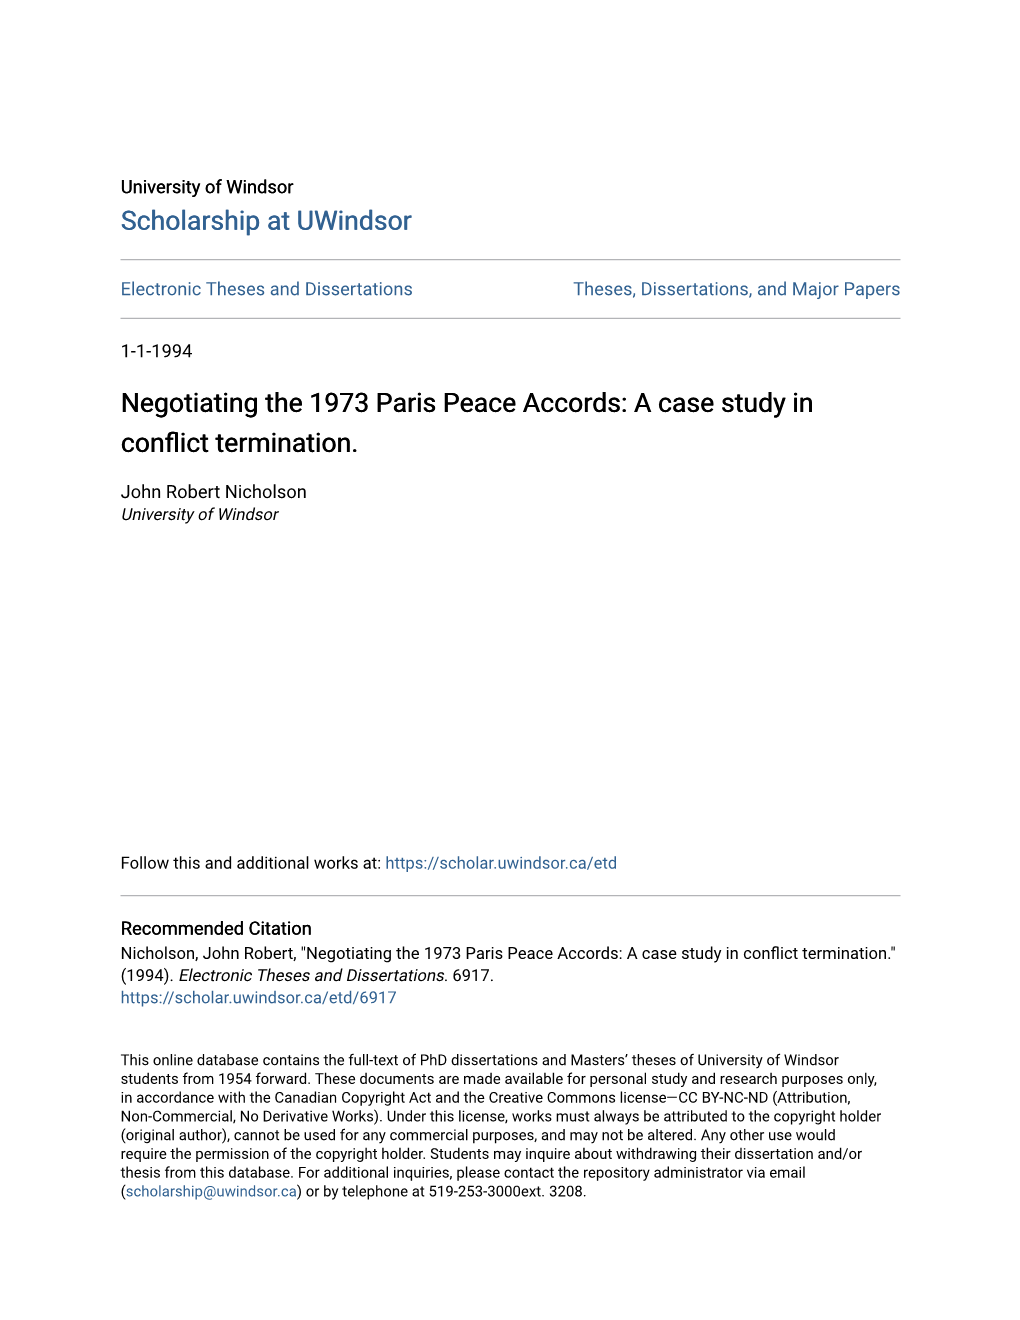 Negotiating the 1973 Paris Peace Accords: a Case Study in Conflict Termination